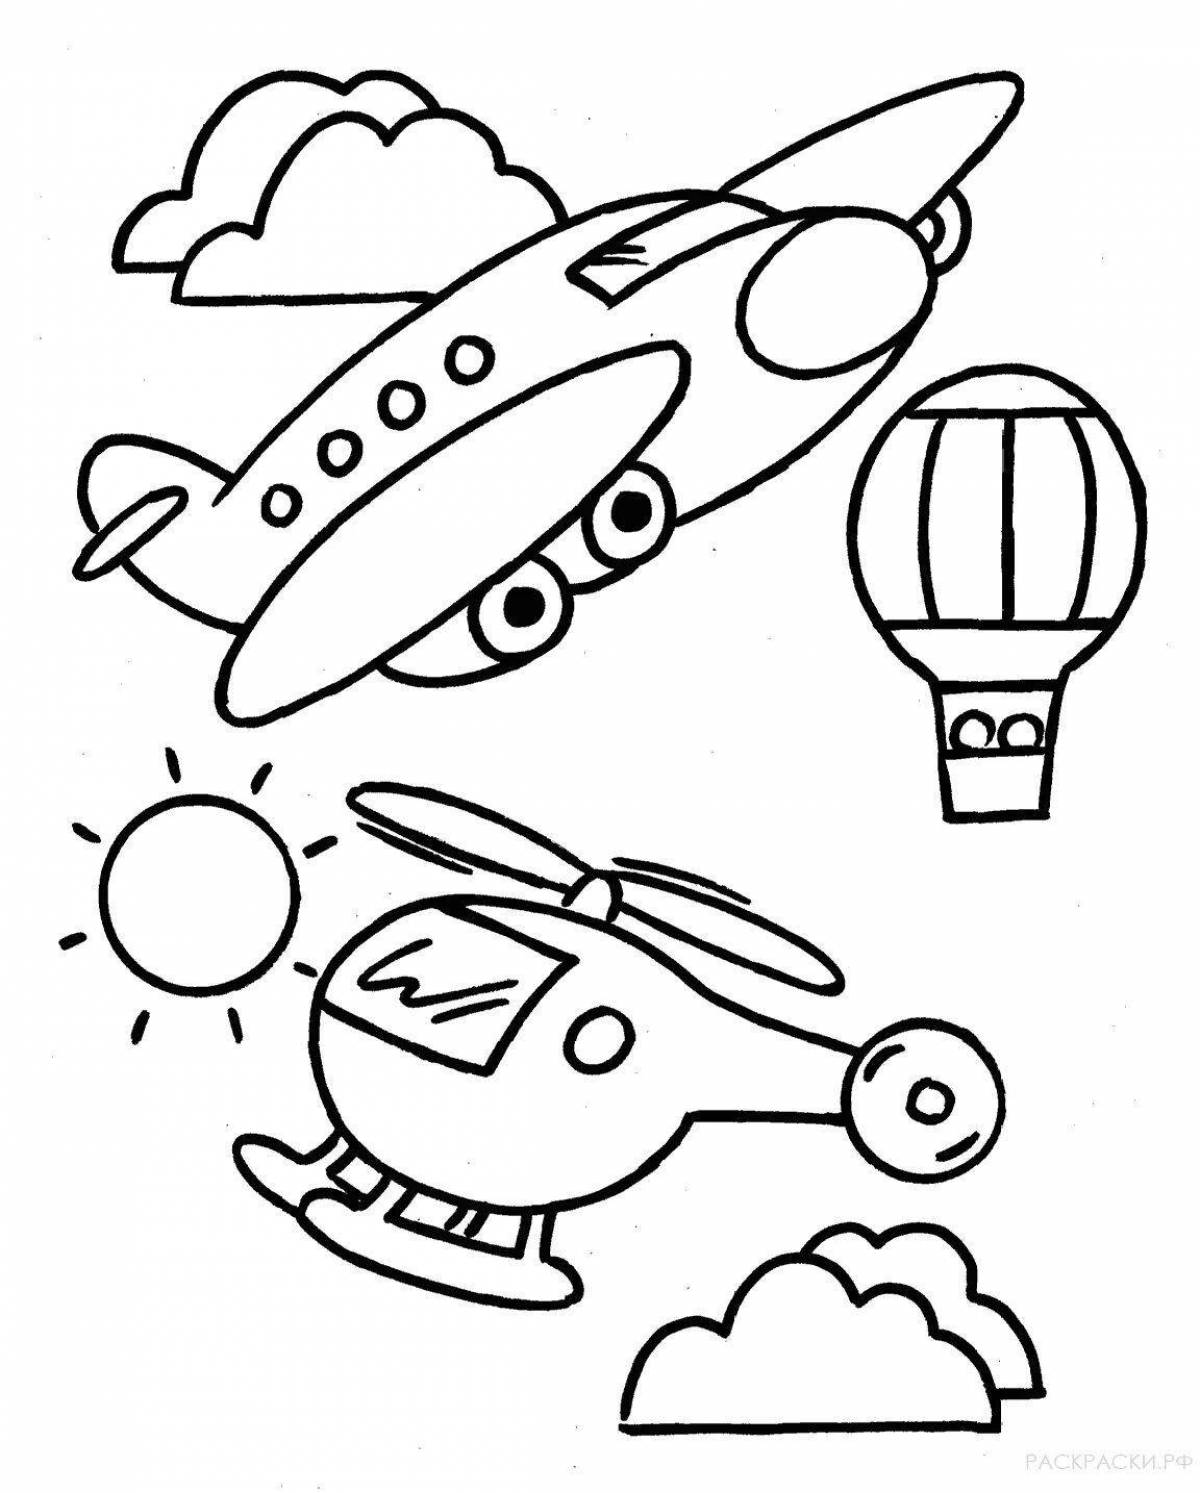 Jet ski live coloring page for 6-7 year olds